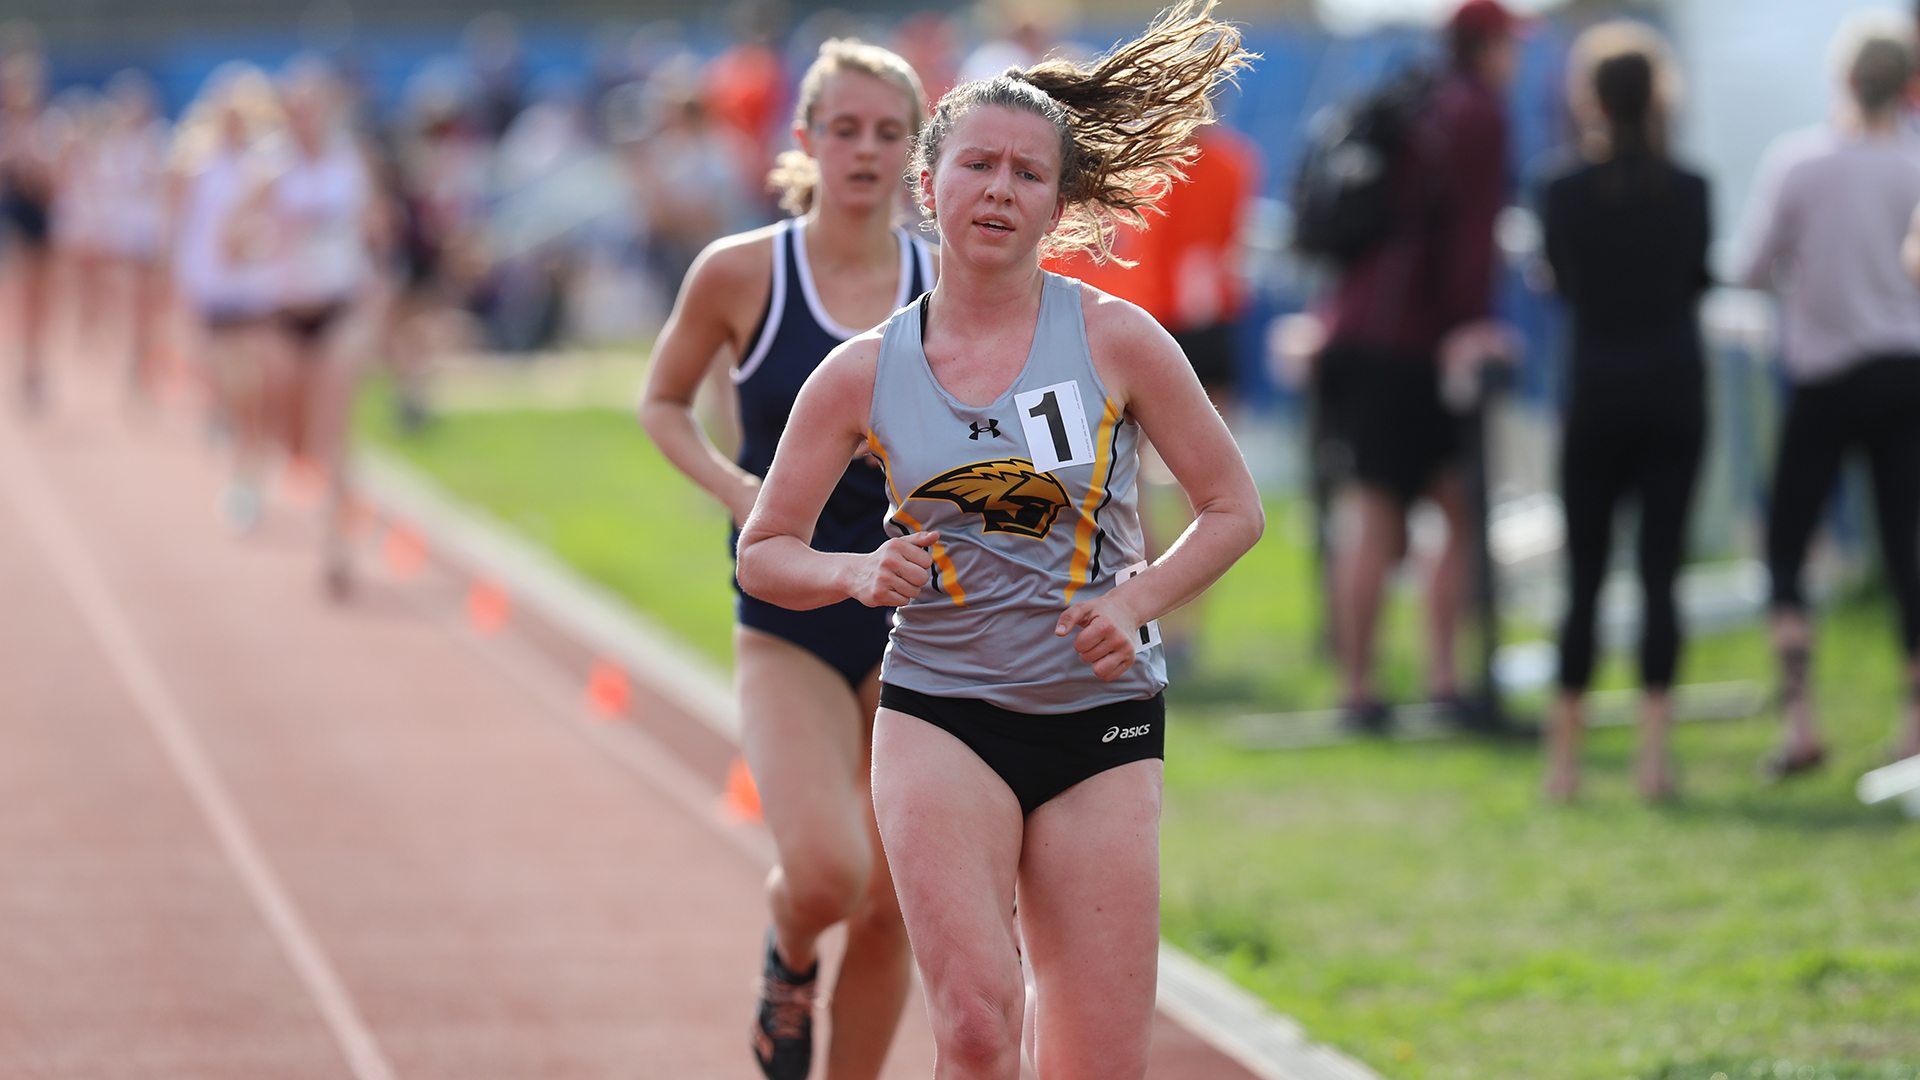 Ashton Keene established a UW-Oshkosh record with her time of 35:43.87 in the 10,000-meter run at the Washington University in St. Louis Invitational.